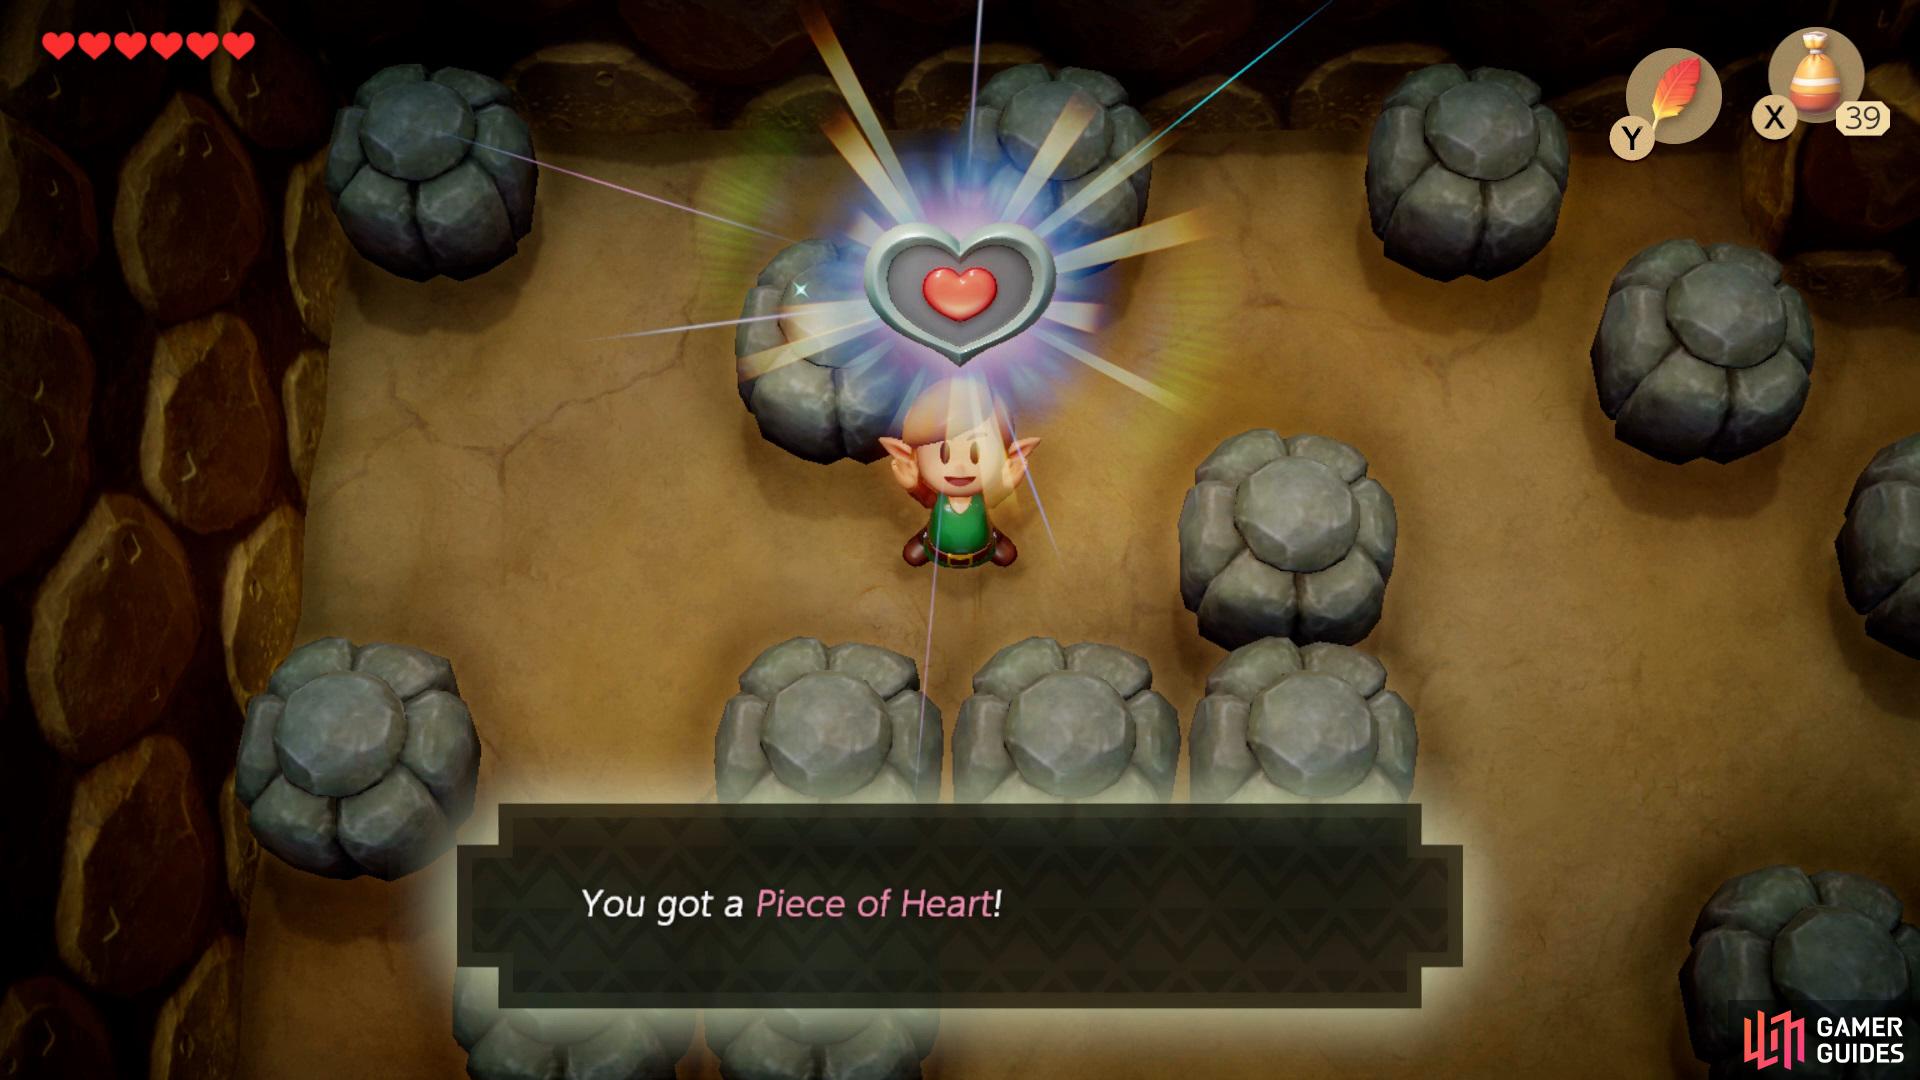 now head back into the first cave you visited in the Mysterious Forest to get a Piece of Heart.